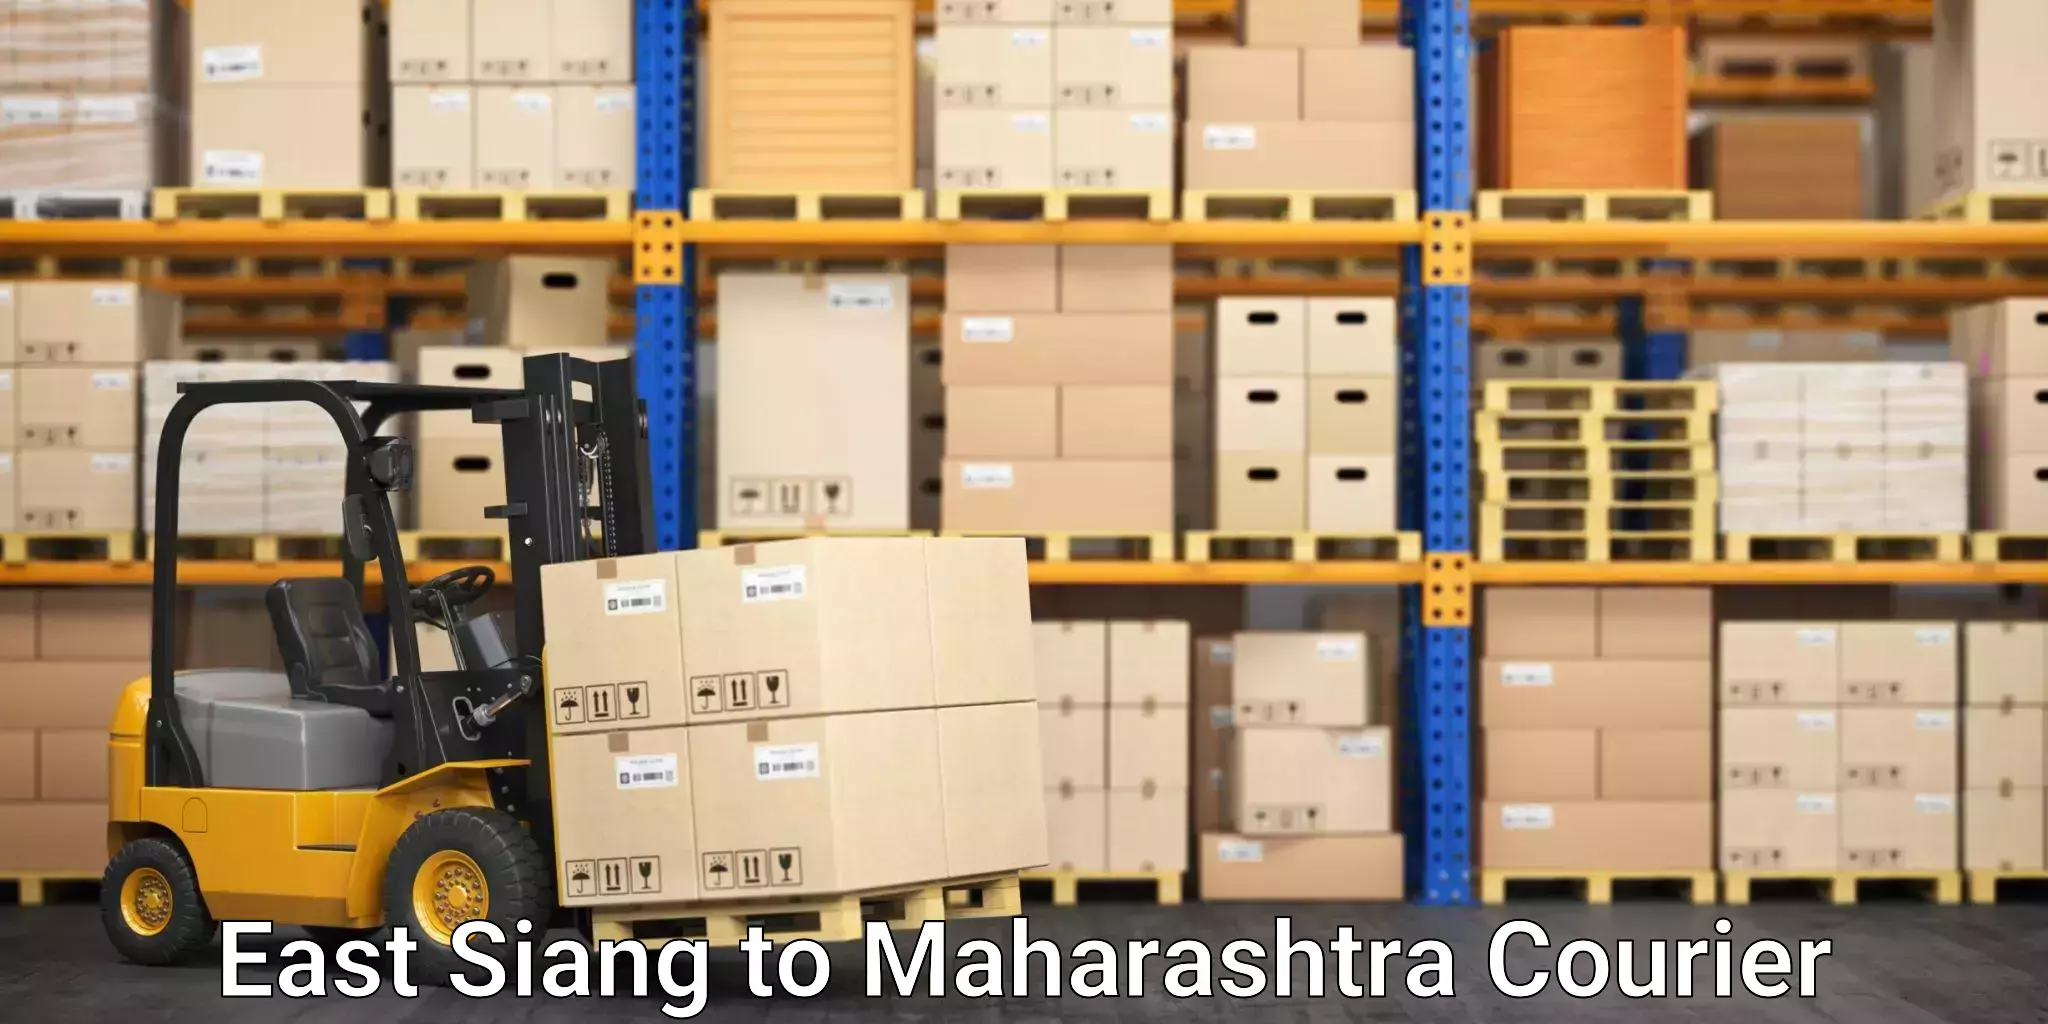 State-of-the-art courier technology East Siang to Kavathe Mahankal